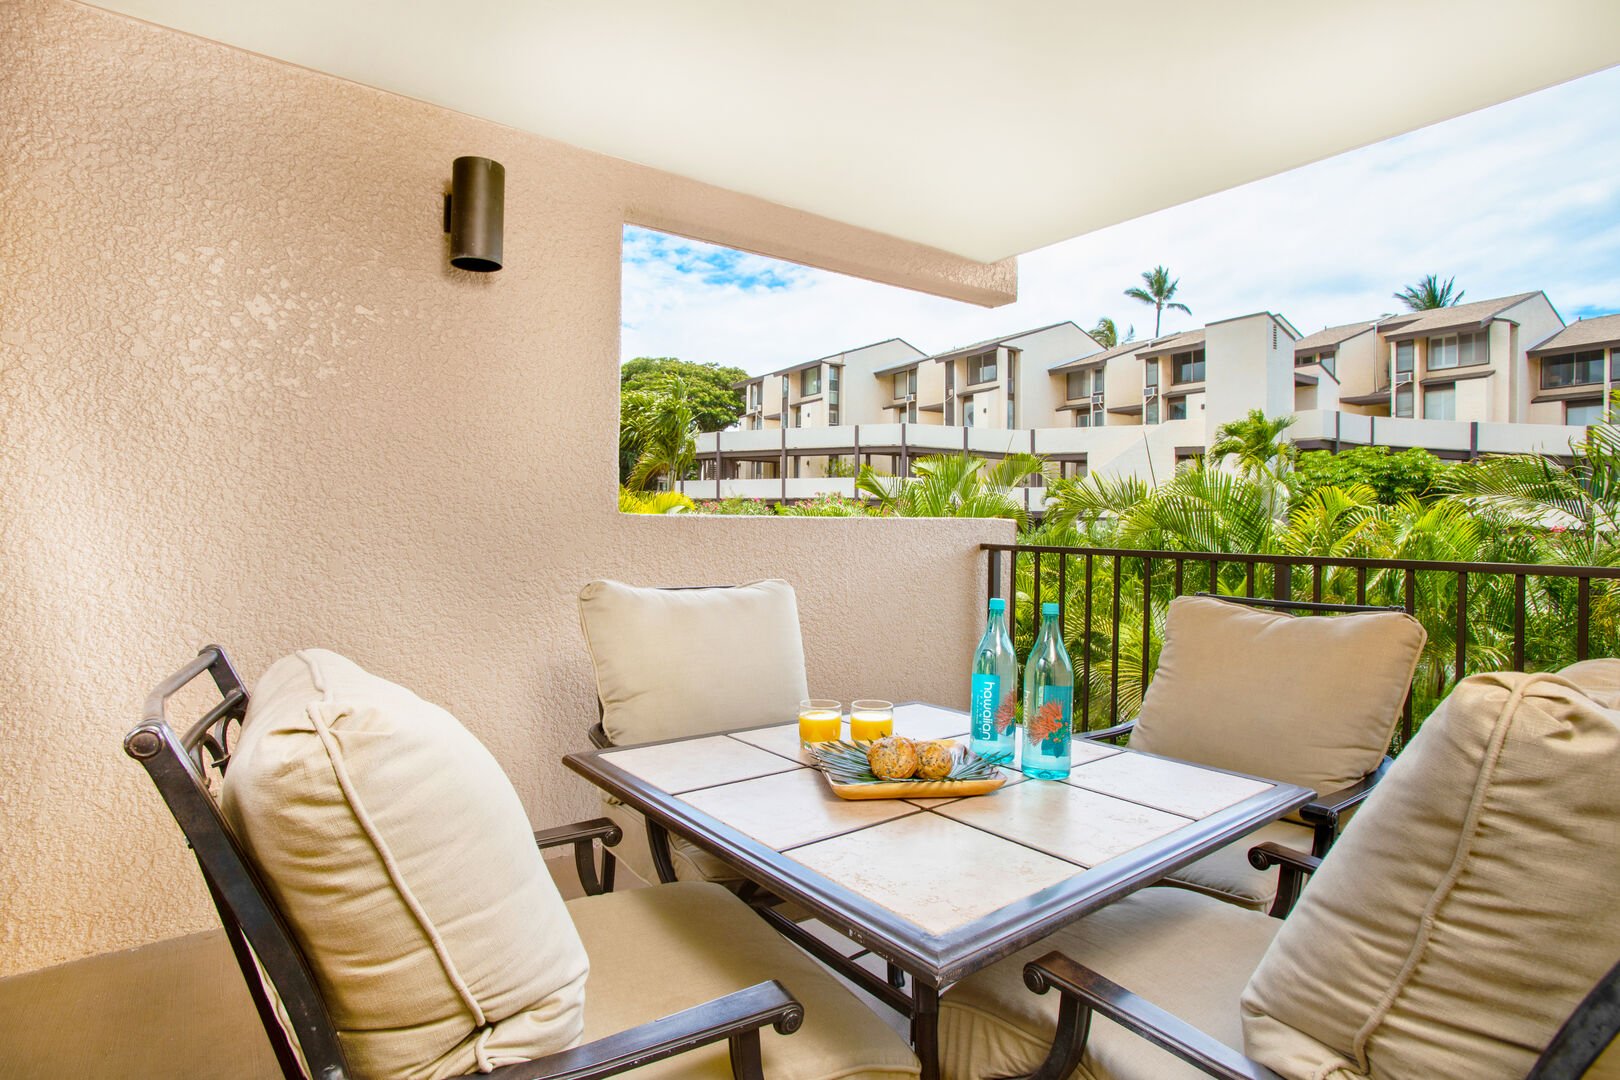 Relax and take a look at the garden view from your own private lanai!